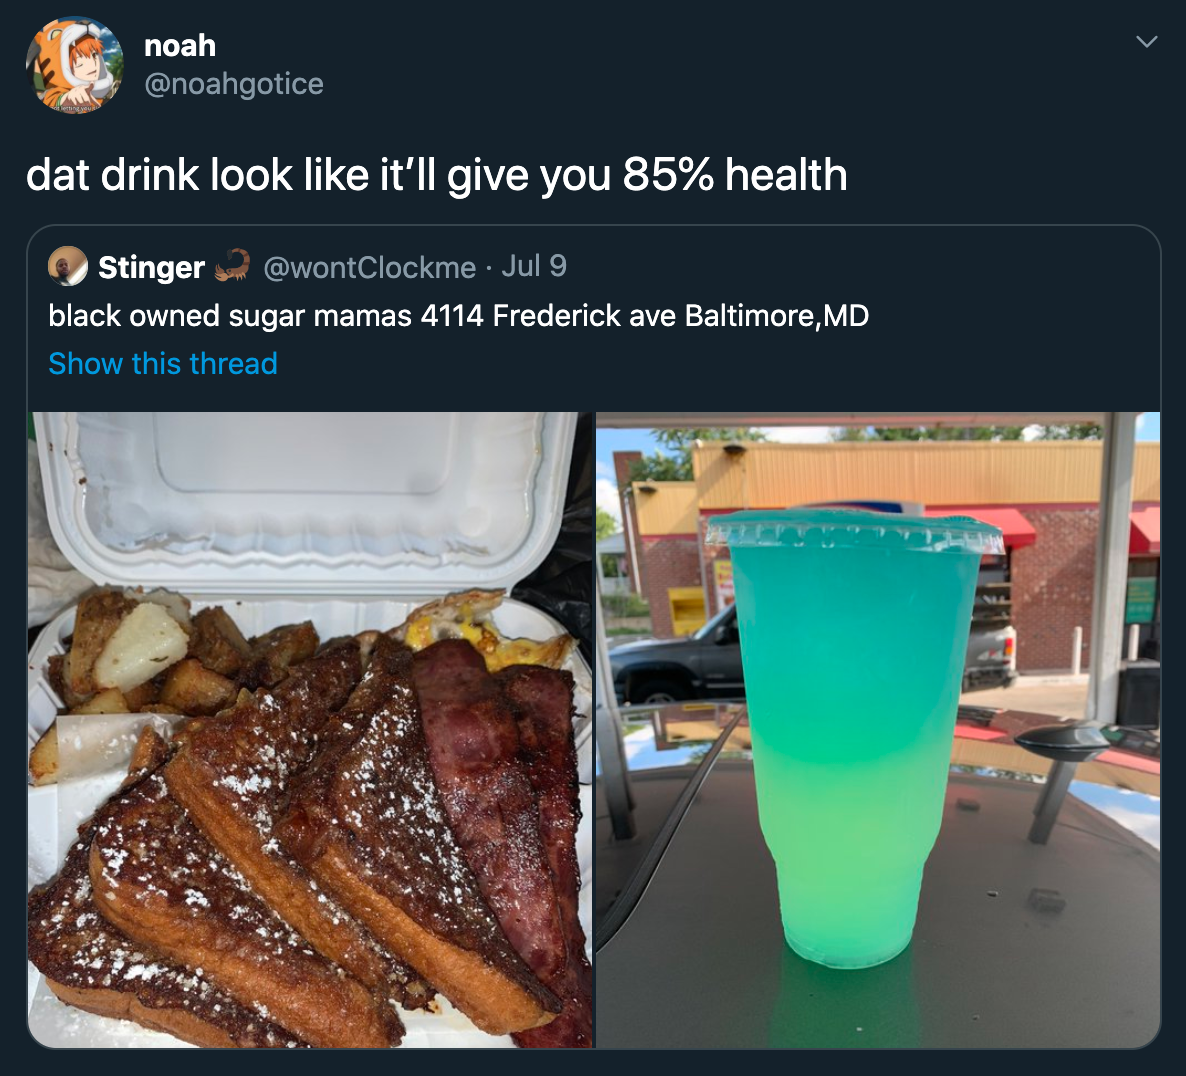 dat drink look it'll give you 85% health